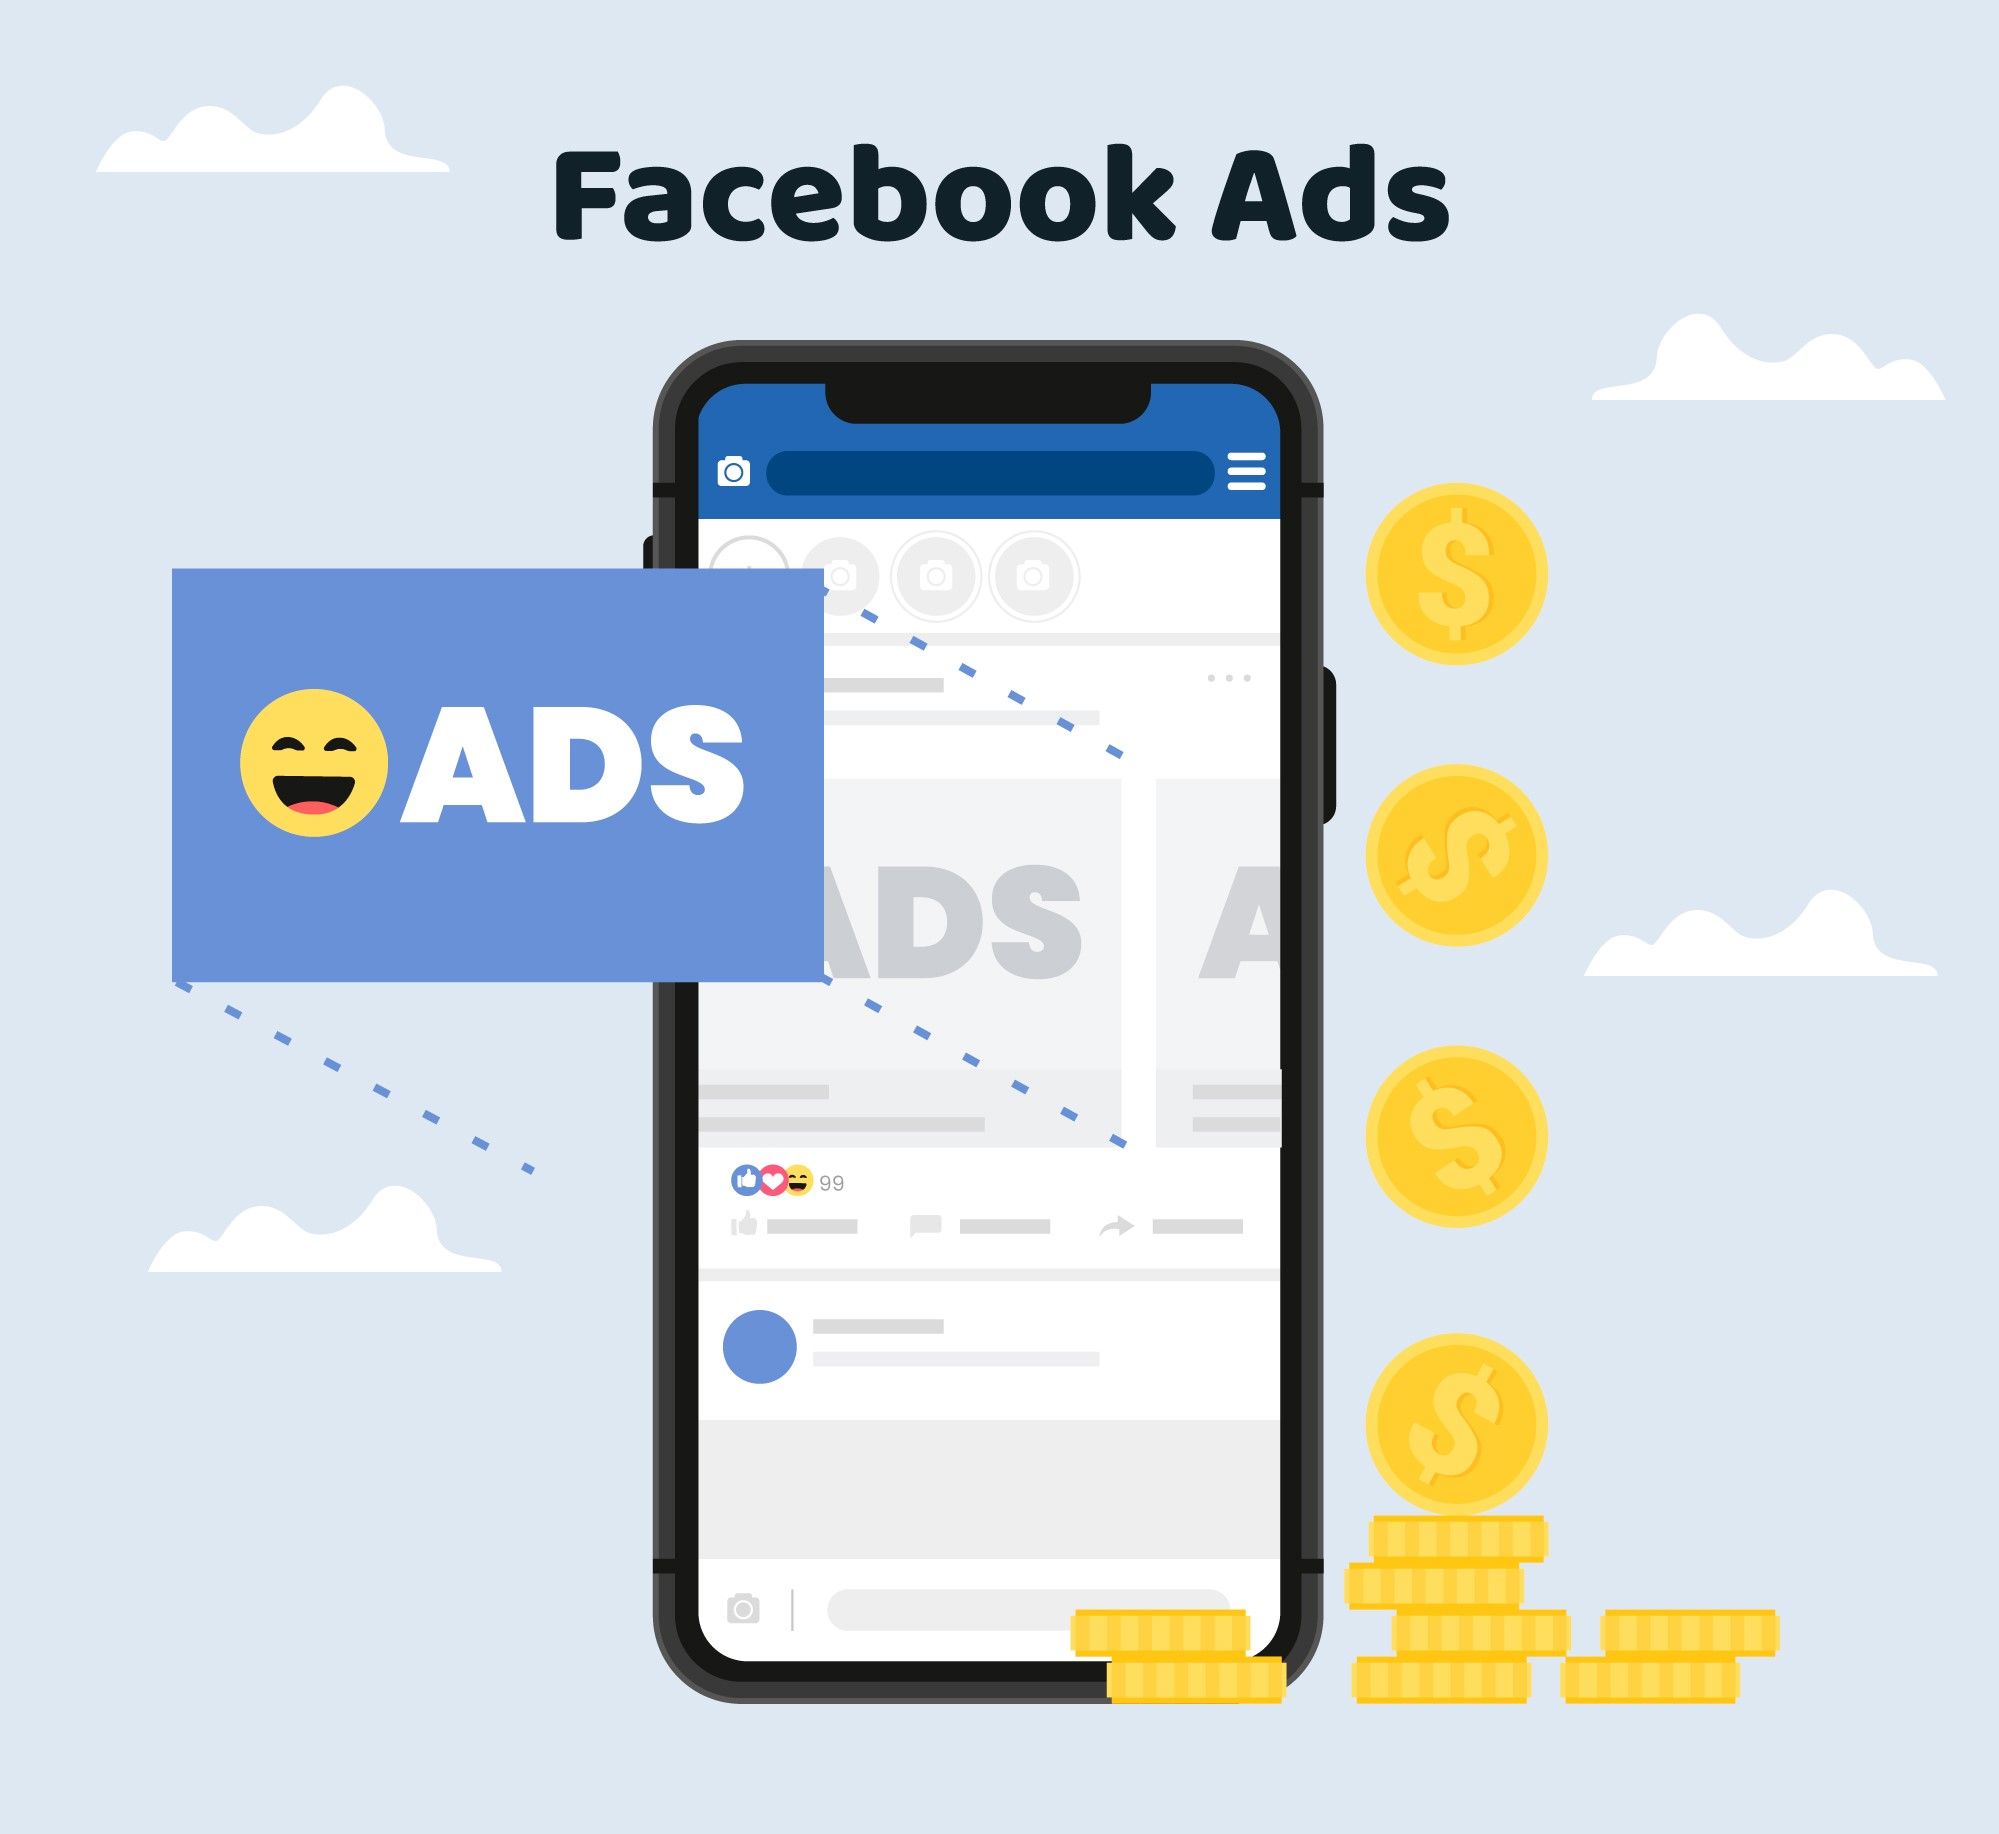 Top 6 Tips to Enhance Your Facebook Video Ads